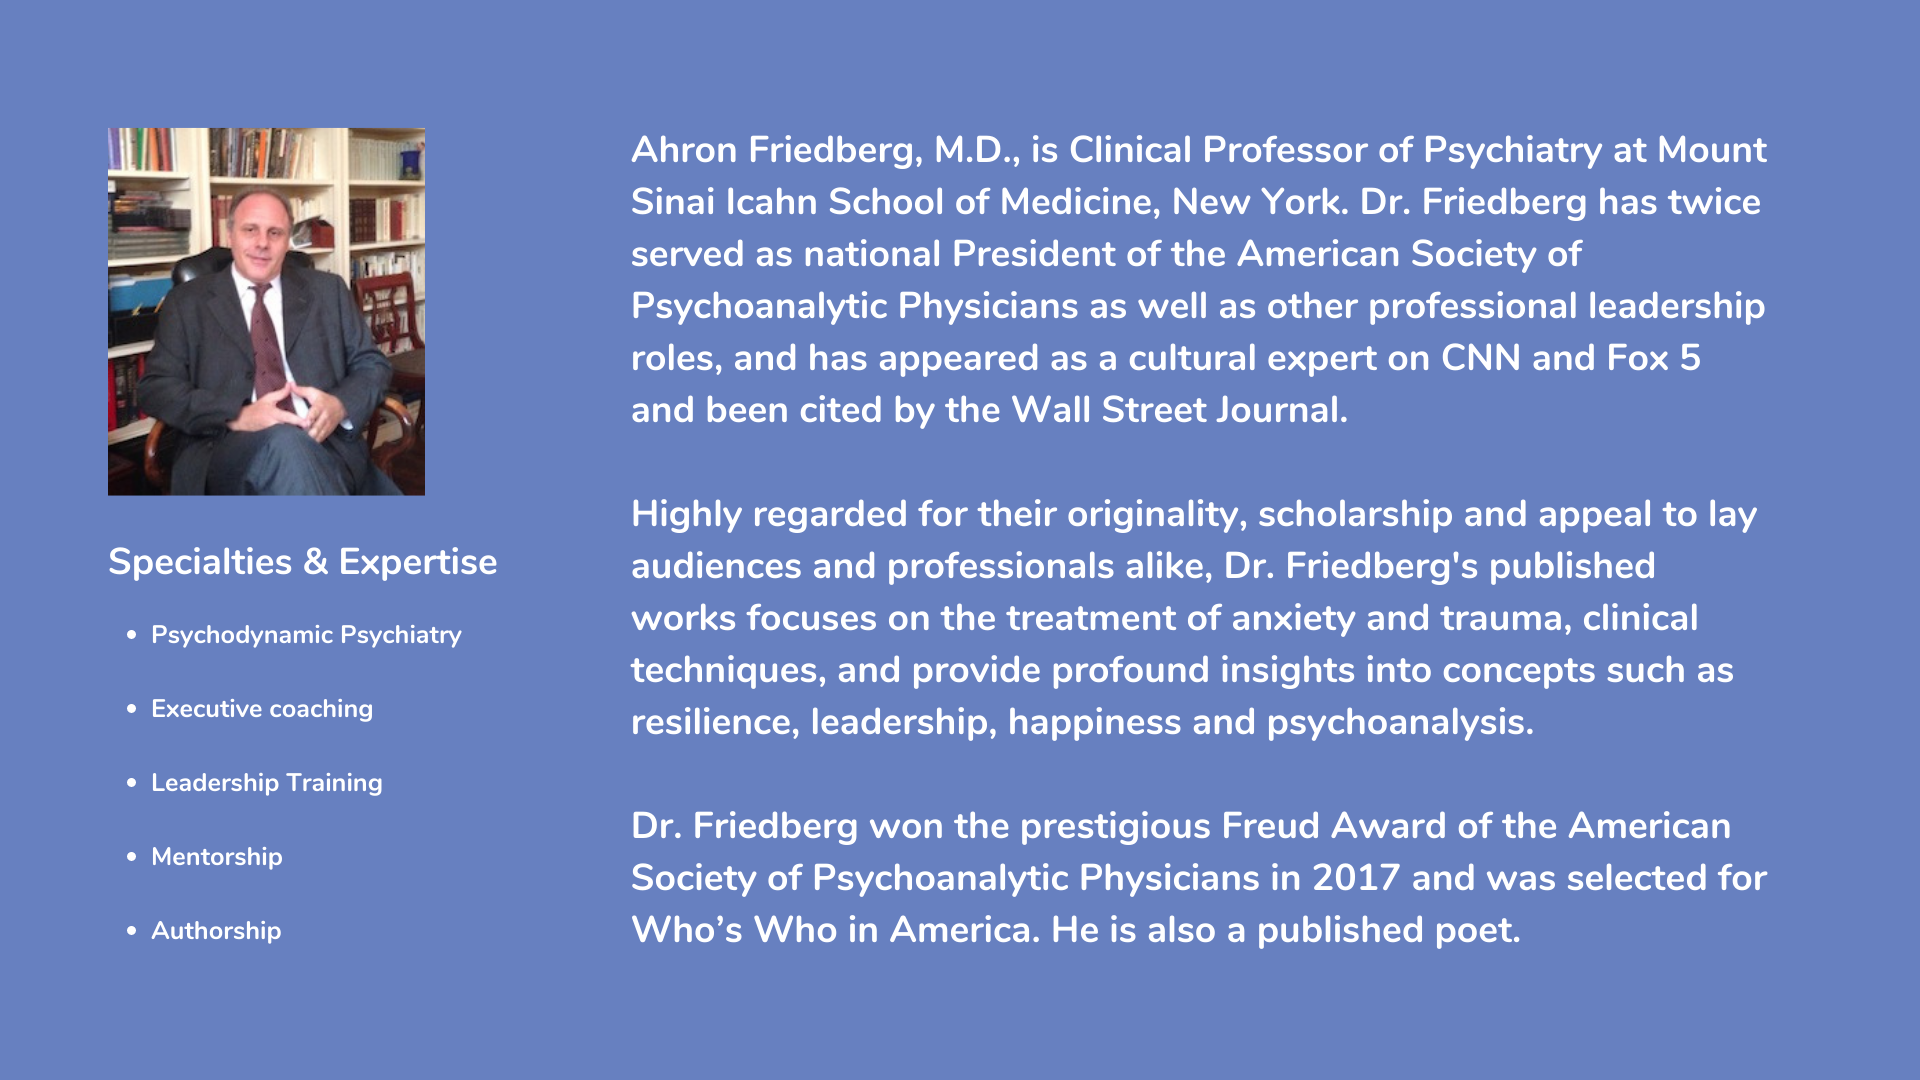 Photo of and information about, acclaimed author, keynote speaker and psychoanalyst, Ahron Friedberg, M.D.